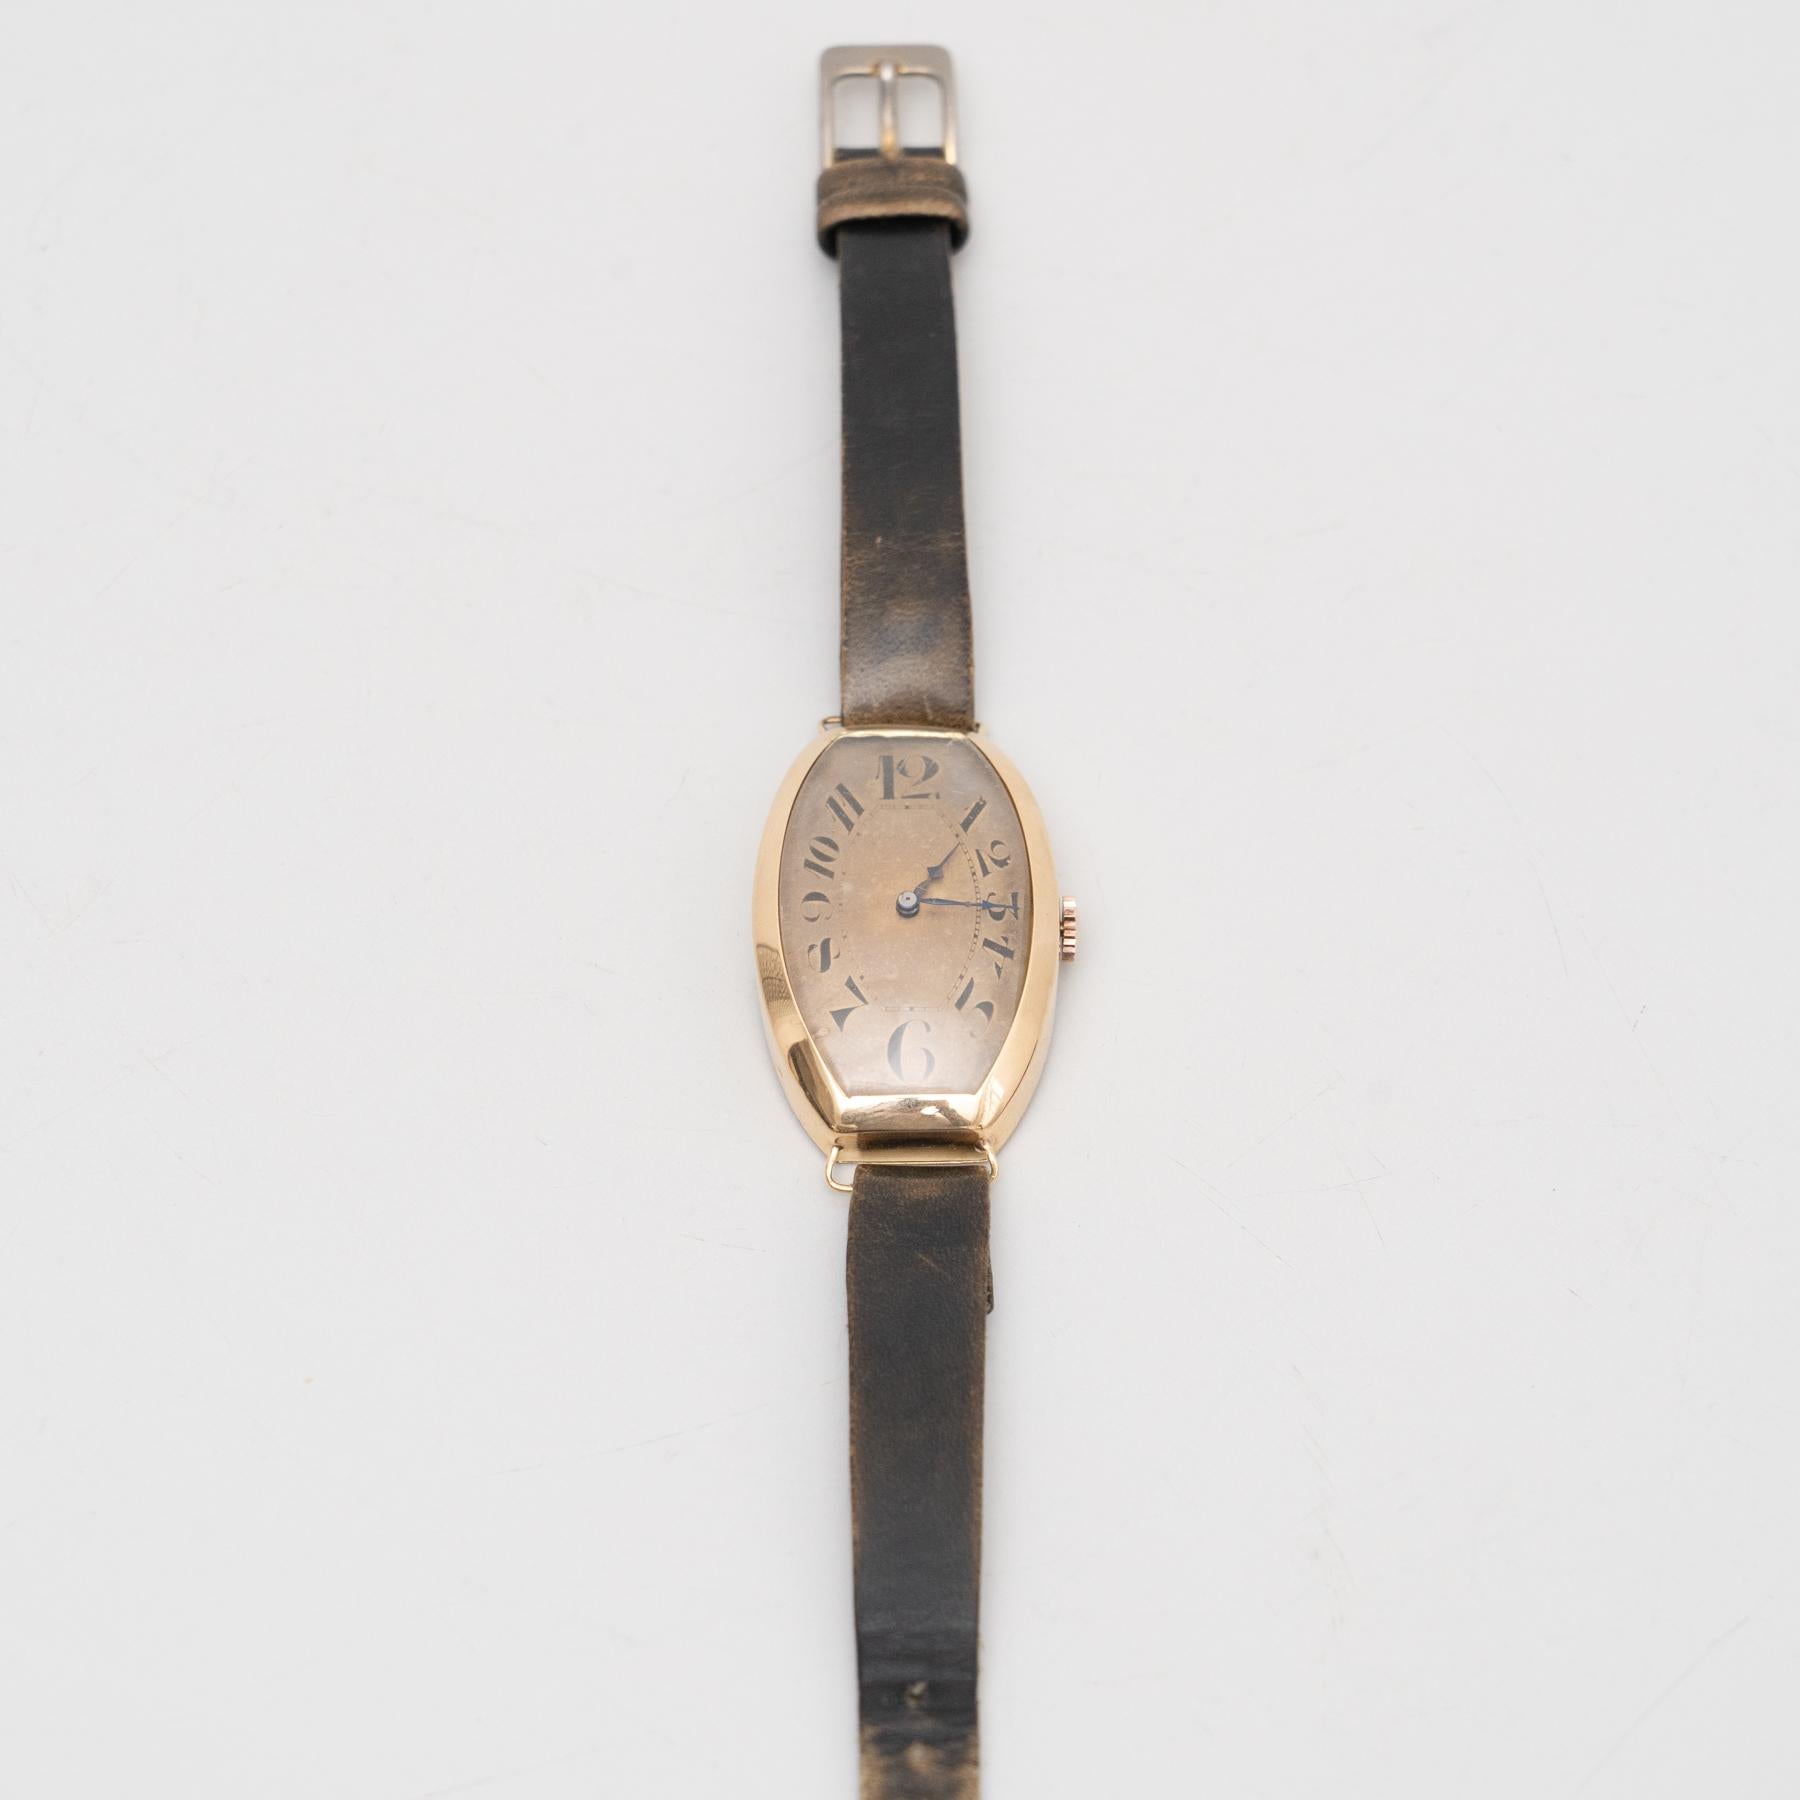 Vintage traditional wrist watch with the original leather wrist band.

Step back in time with this exquisite vintage traditional wristwatch from the 1930s. A perfect addition to any watch collection or a statement piece to wear, this unbranded